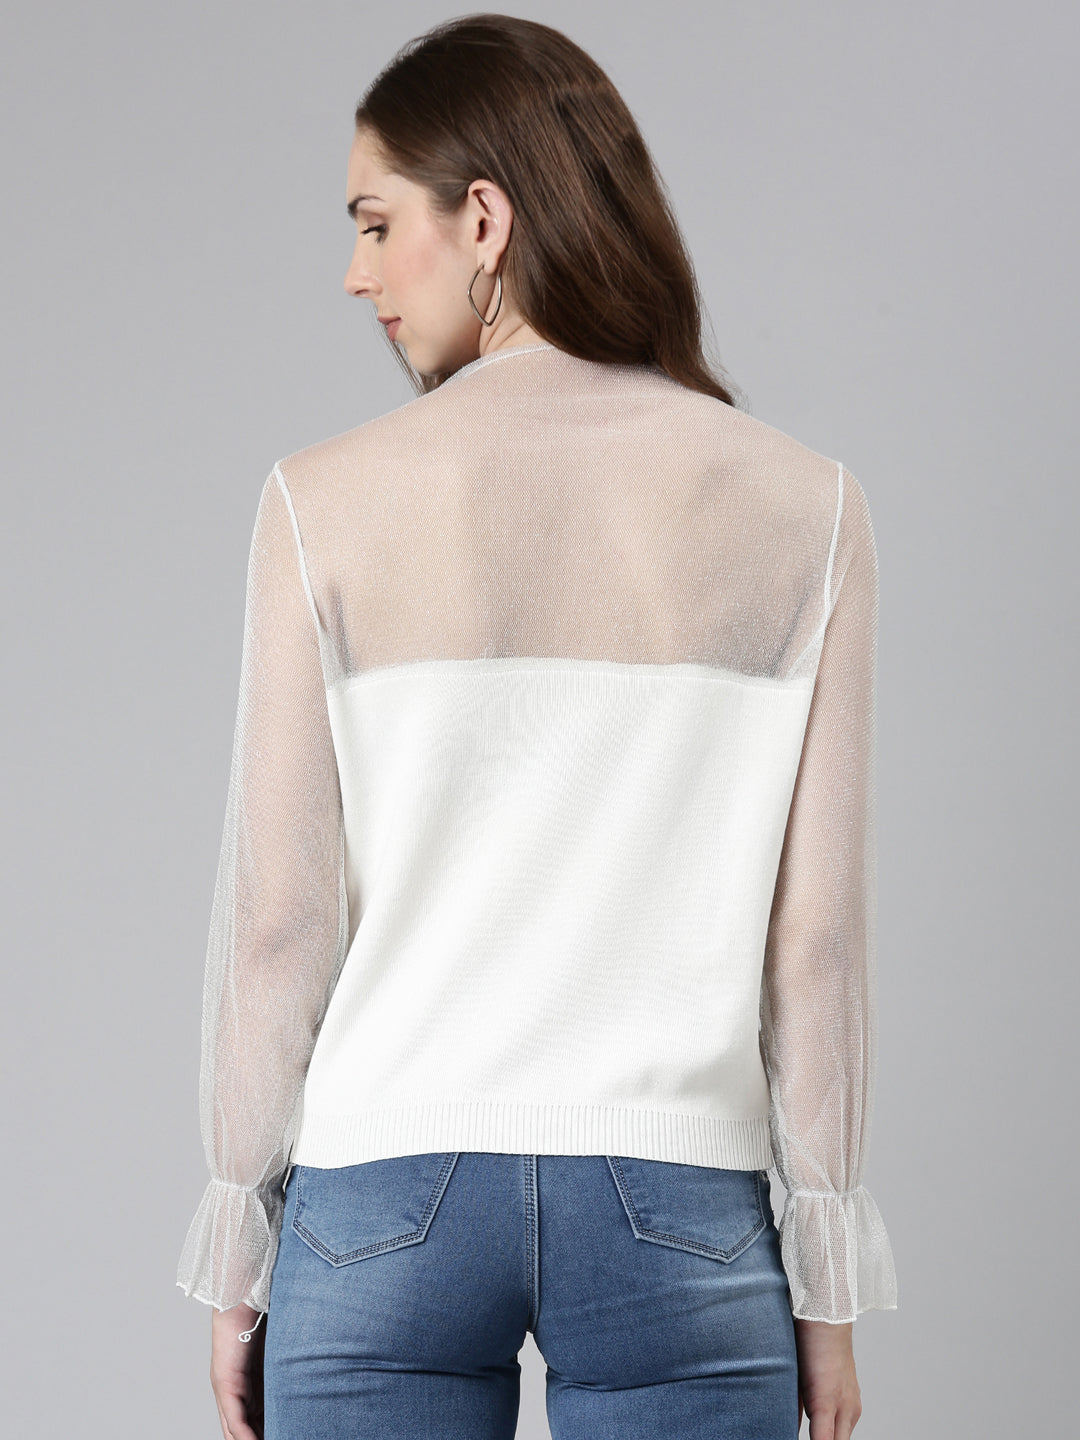 High Neck Solid Regular White Top